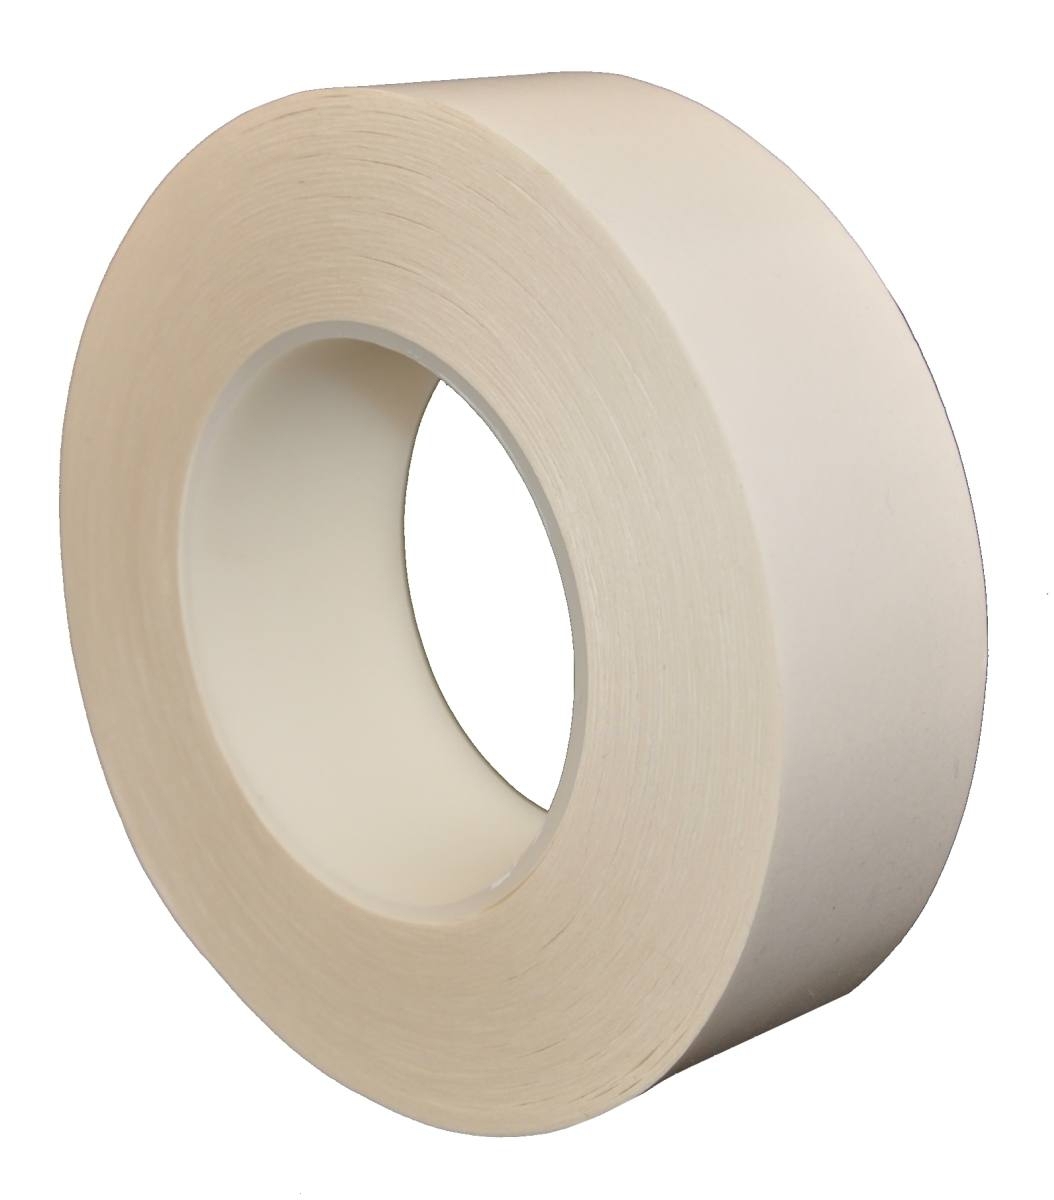 SKS silicone paper release liner, 200mmx150m, coated on both sides with glassine, white